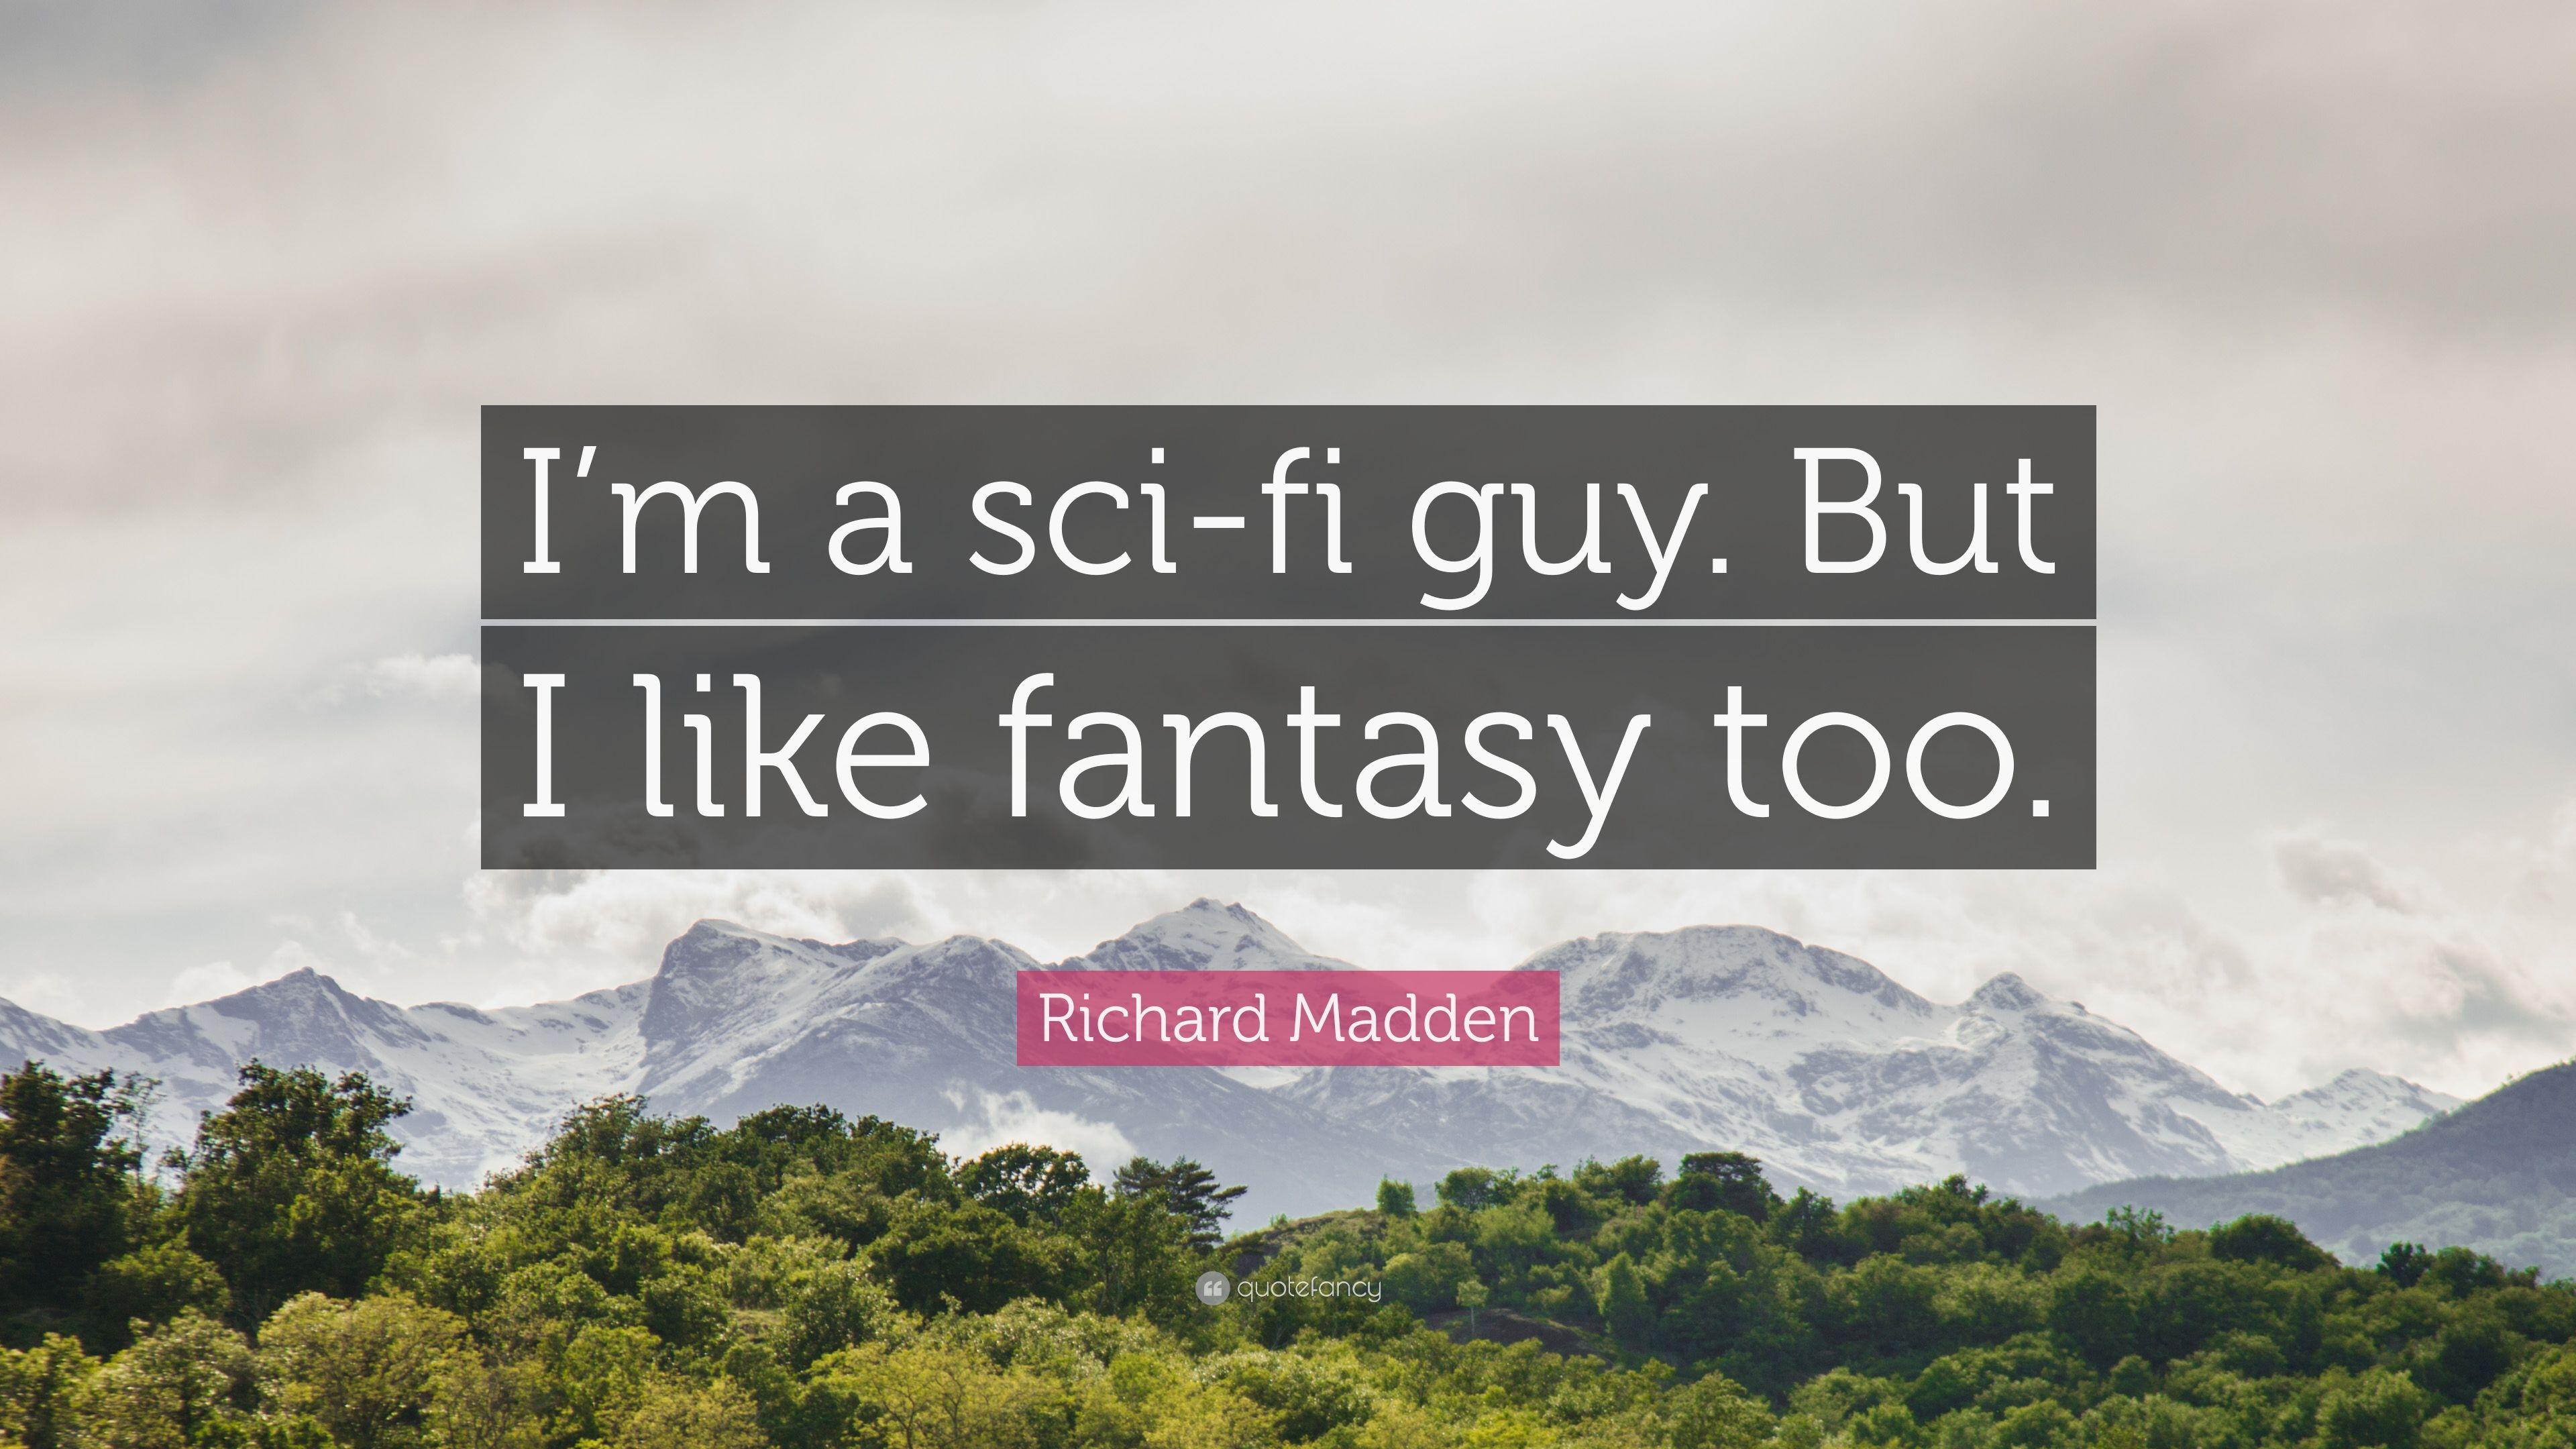 Richard Madden Quote: “I'm A Sci Fi Guy. But I Like Fantasy Too.” 7